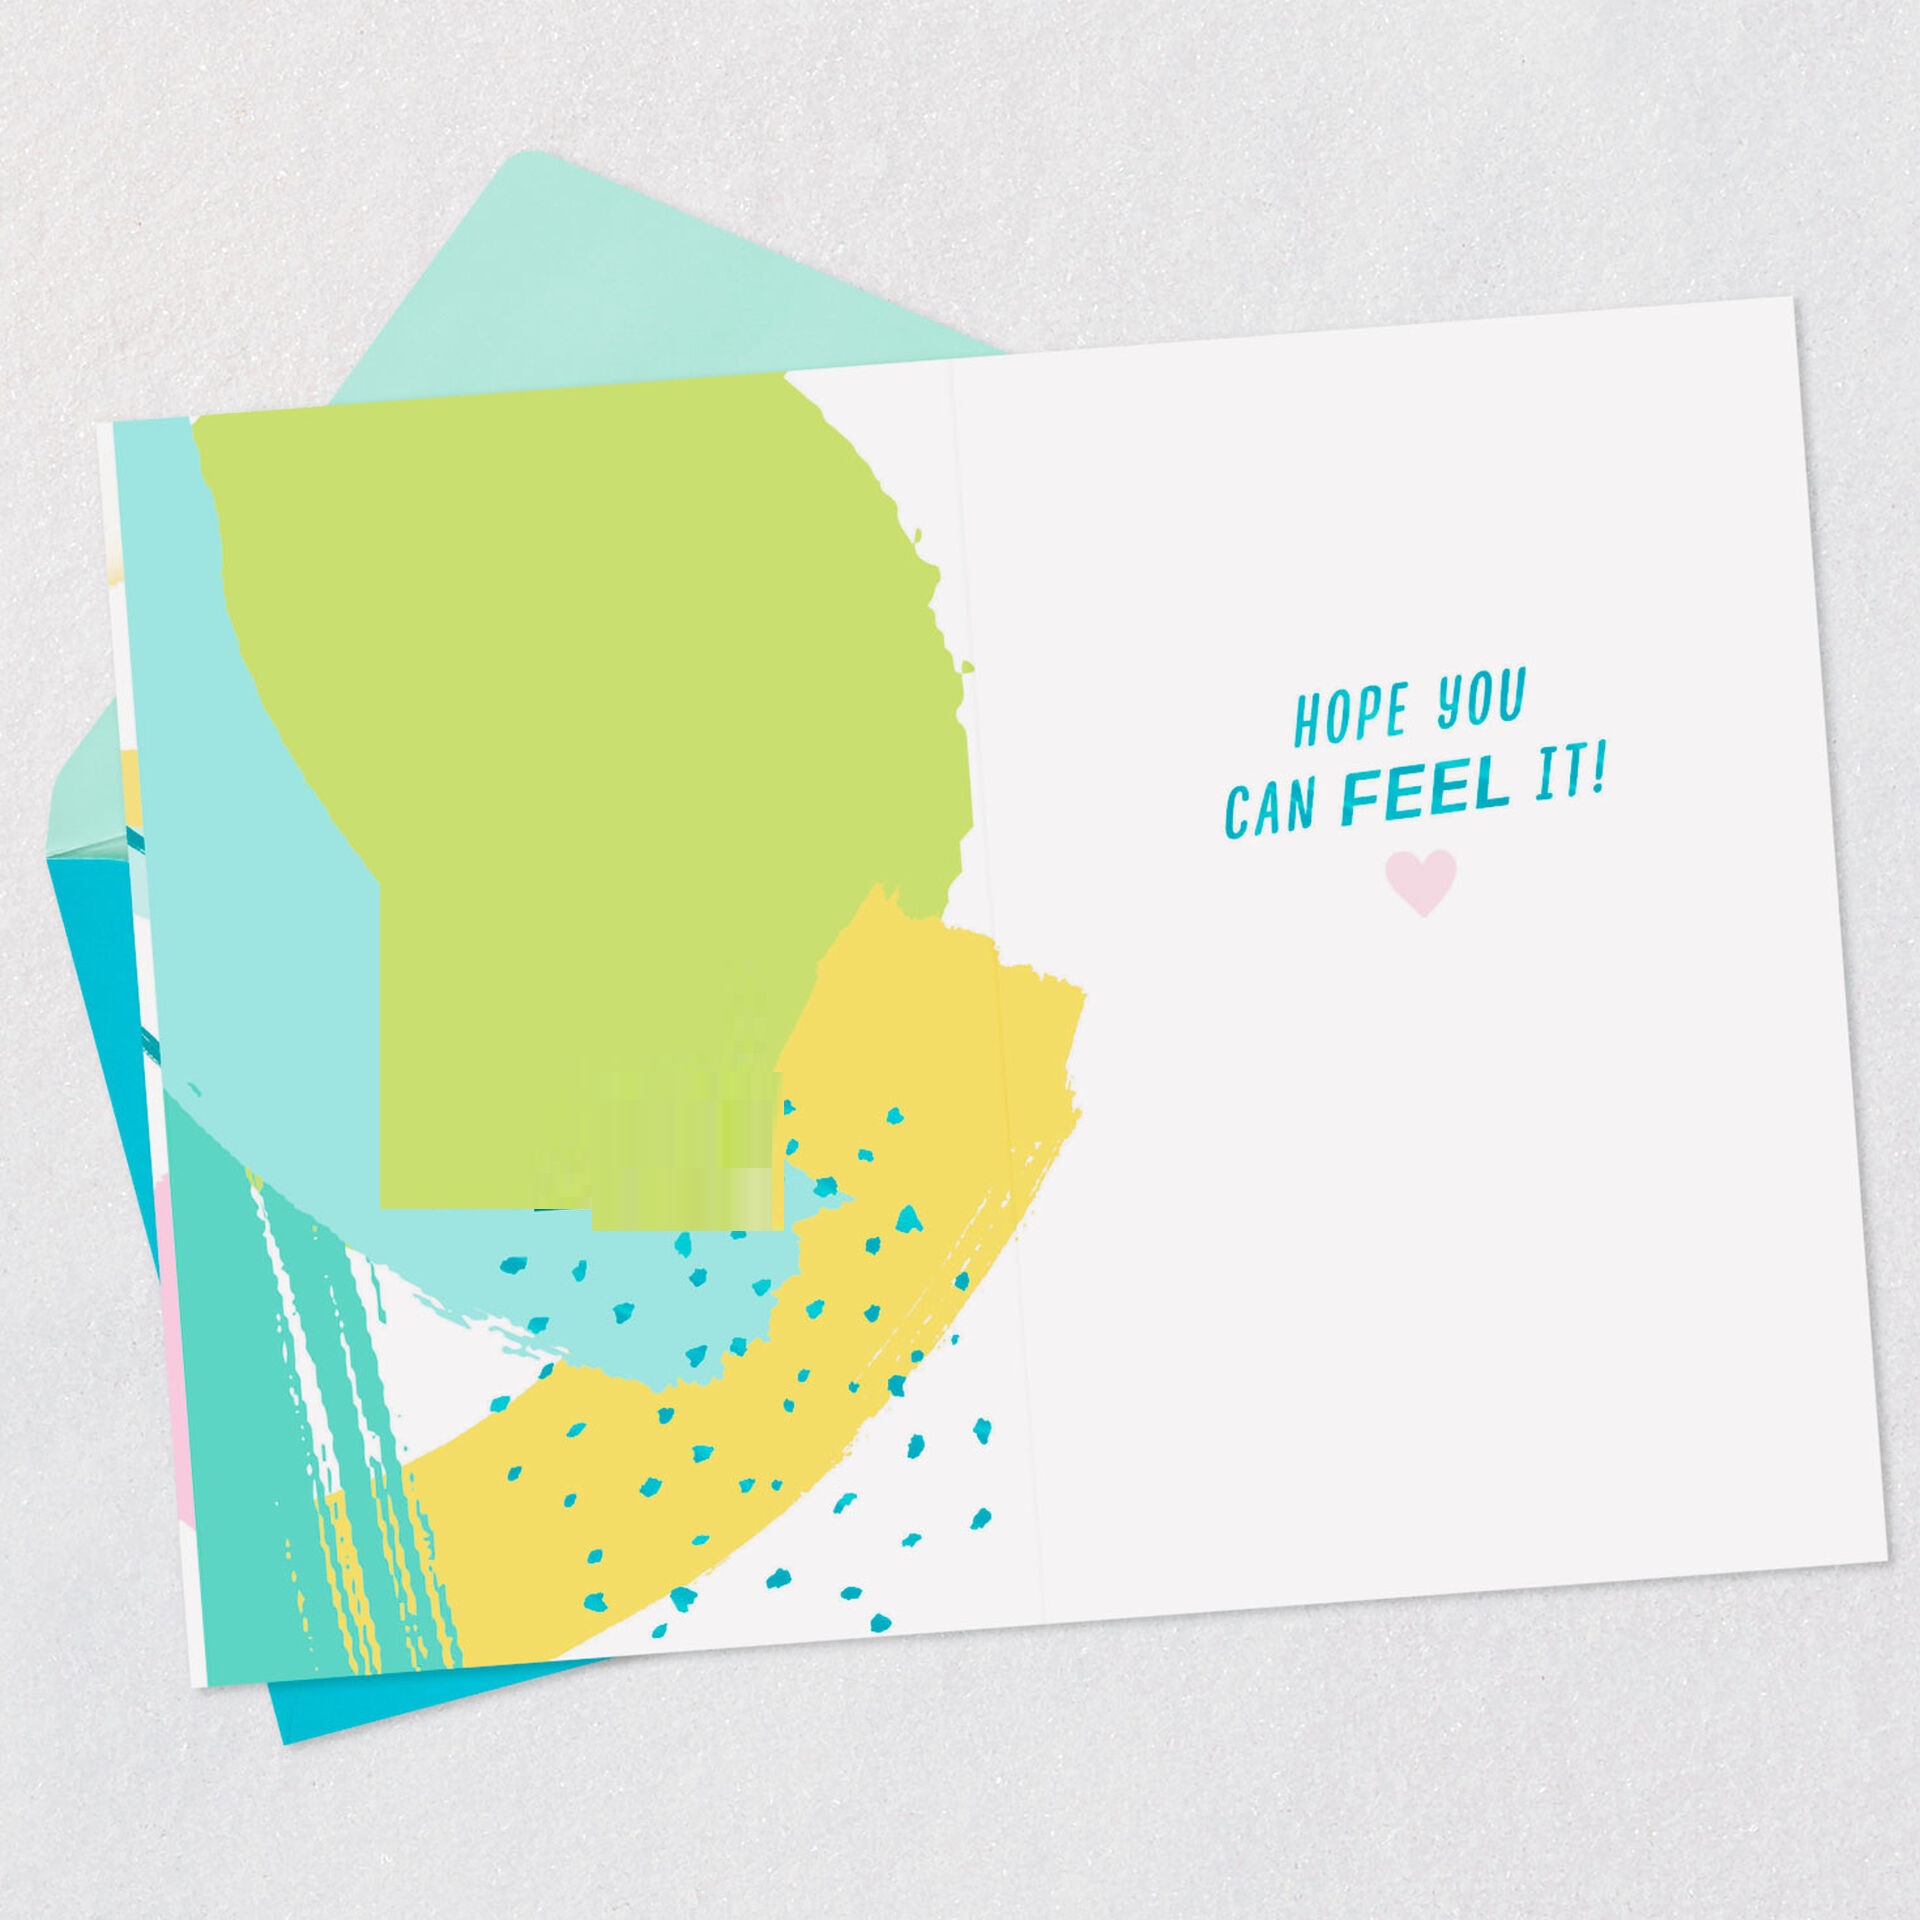 Hands-Making-Heart-Video-Greeting-Thinking-of-You-Card_599NVG1021_03